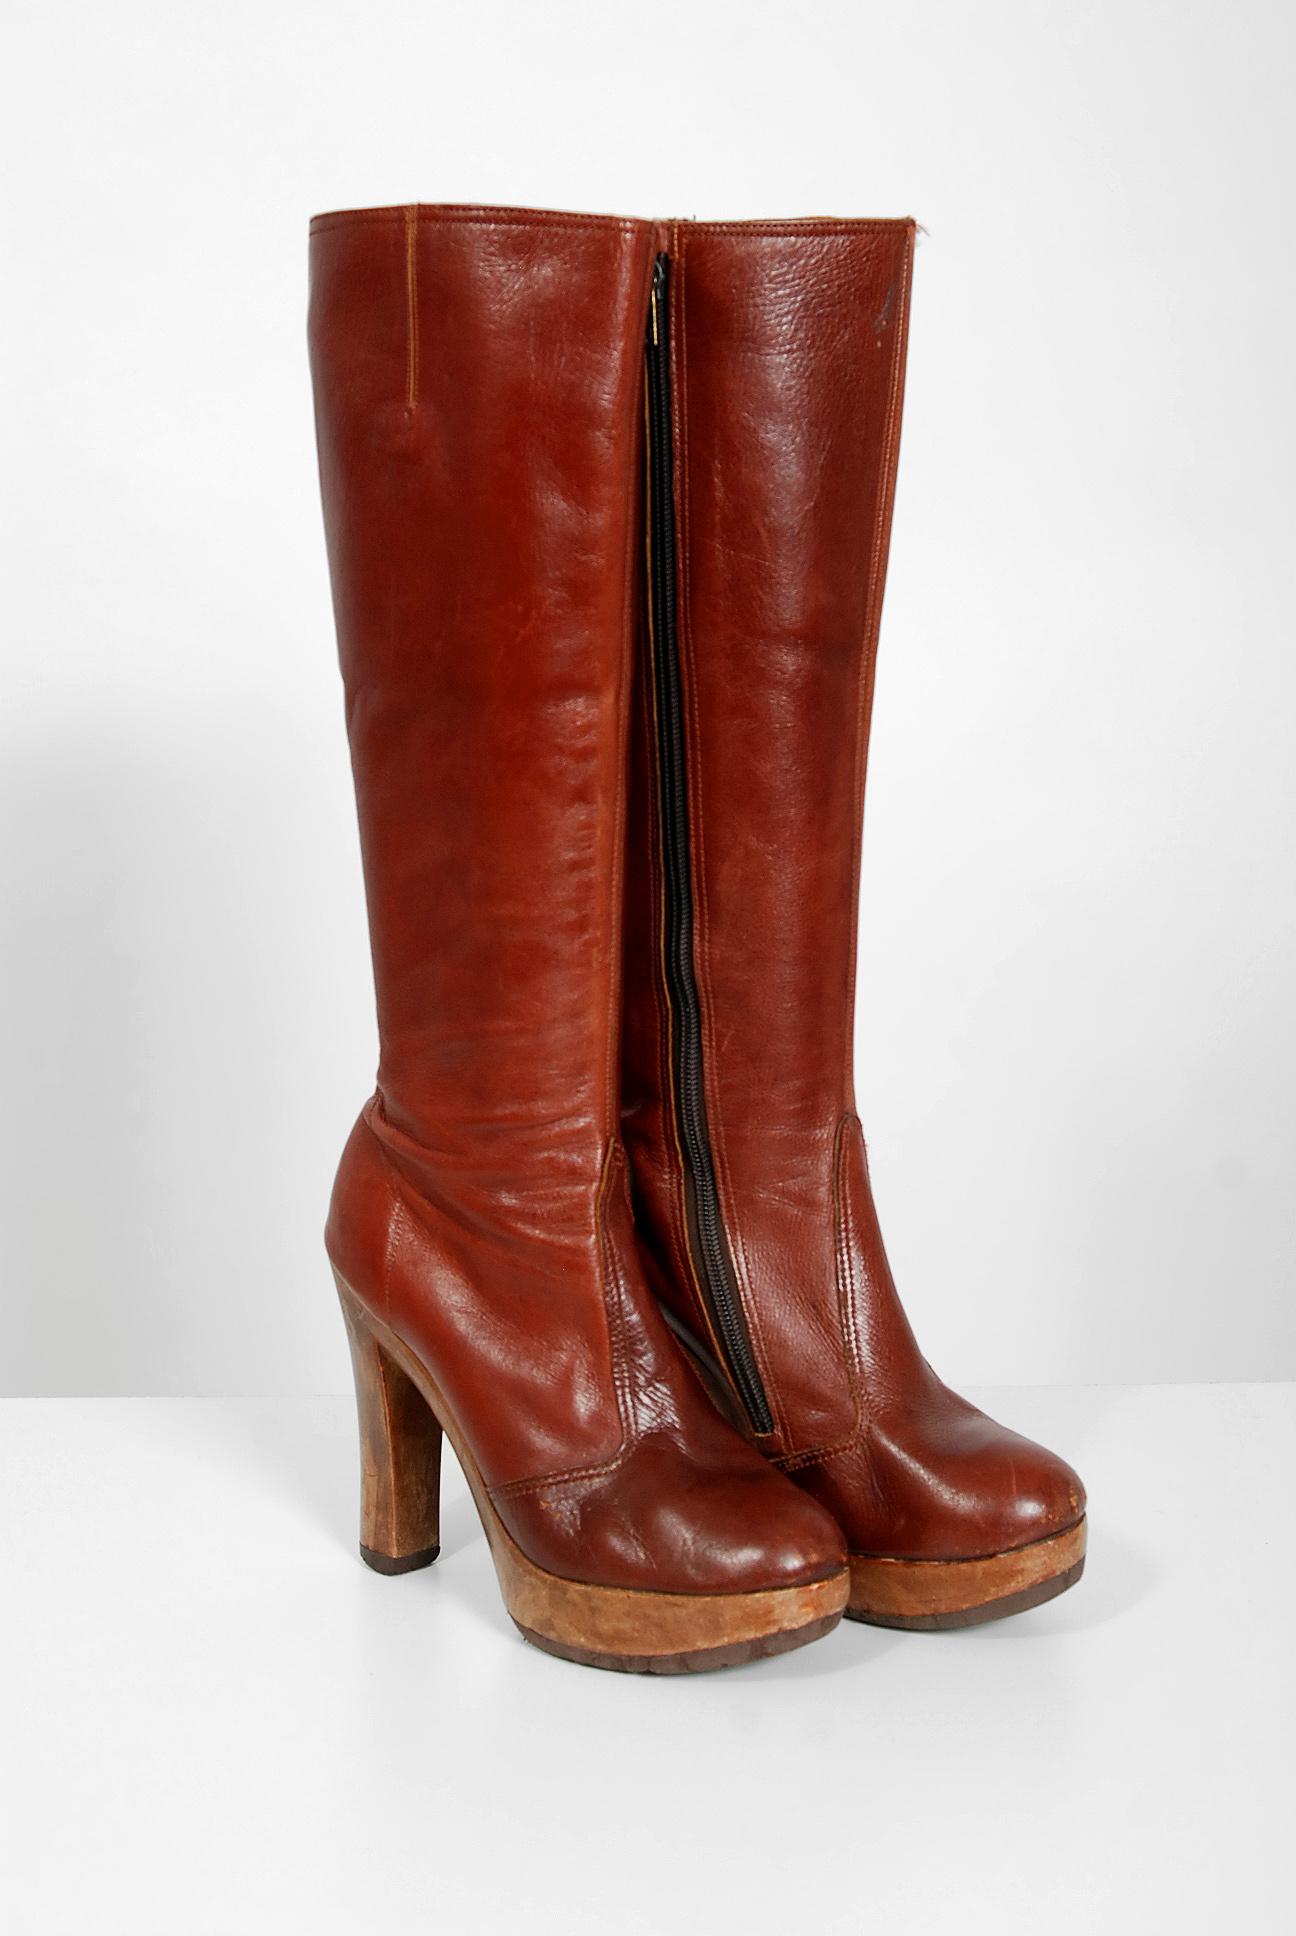 Amazing 1970's Sbicca designer leather boots in the most gorgeous sienna brown color! These boots have unbelievable stacked wood platforms with handcrafted work throughout. I love the shaped heel and seductive knee-high design. Boots like these will